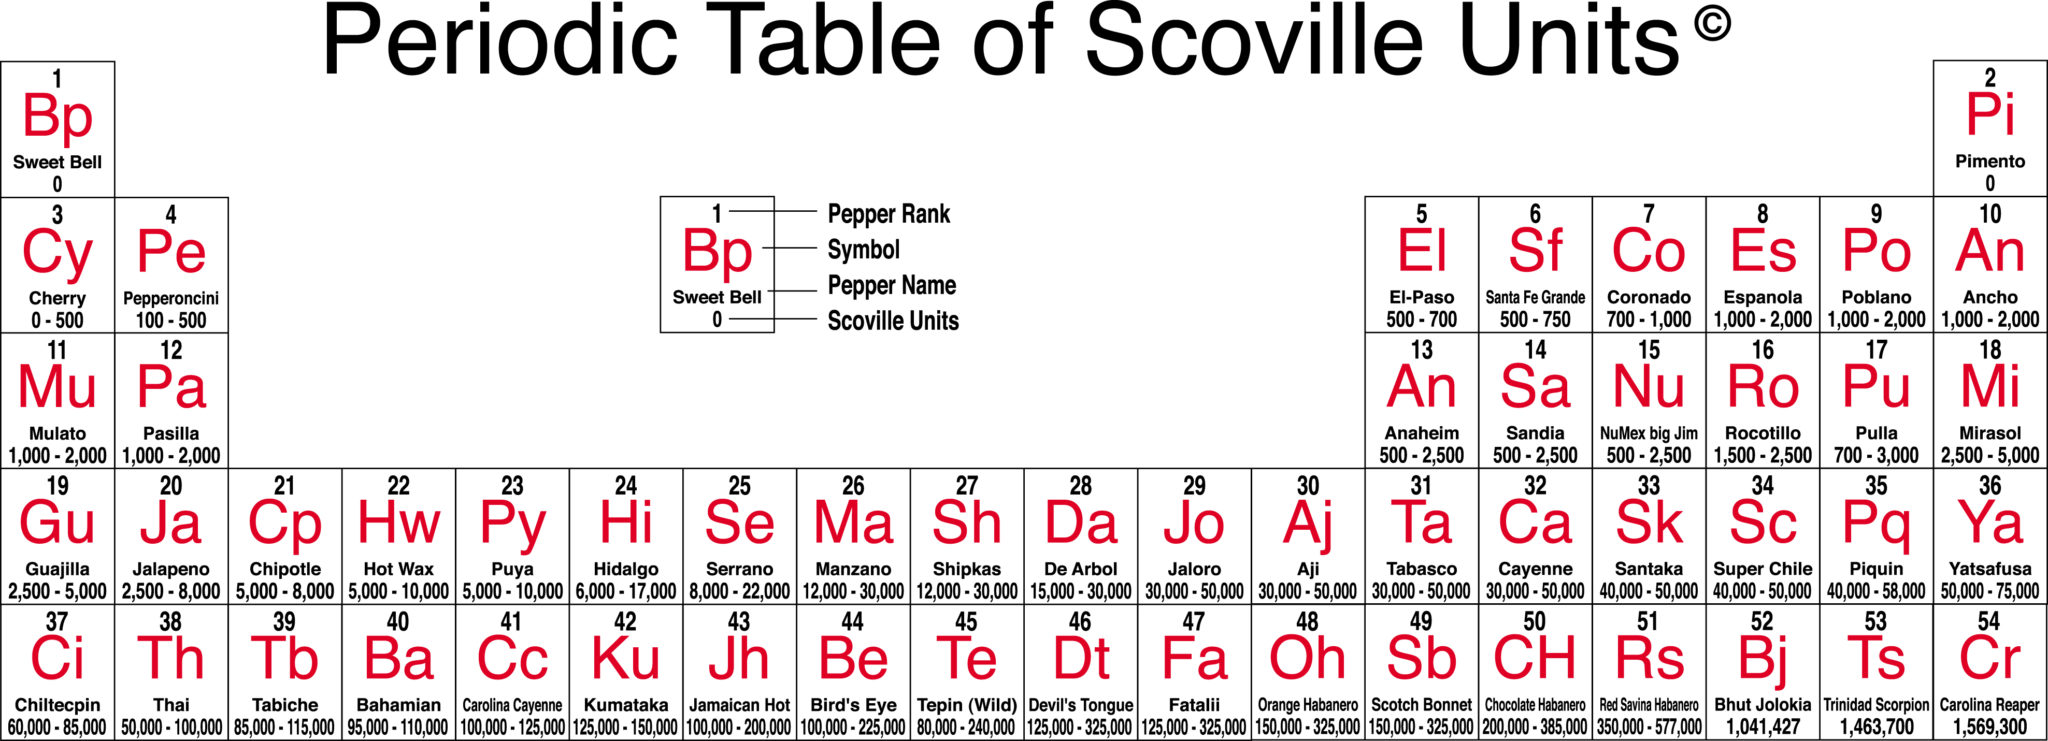 Periodic Table of Scoville Units